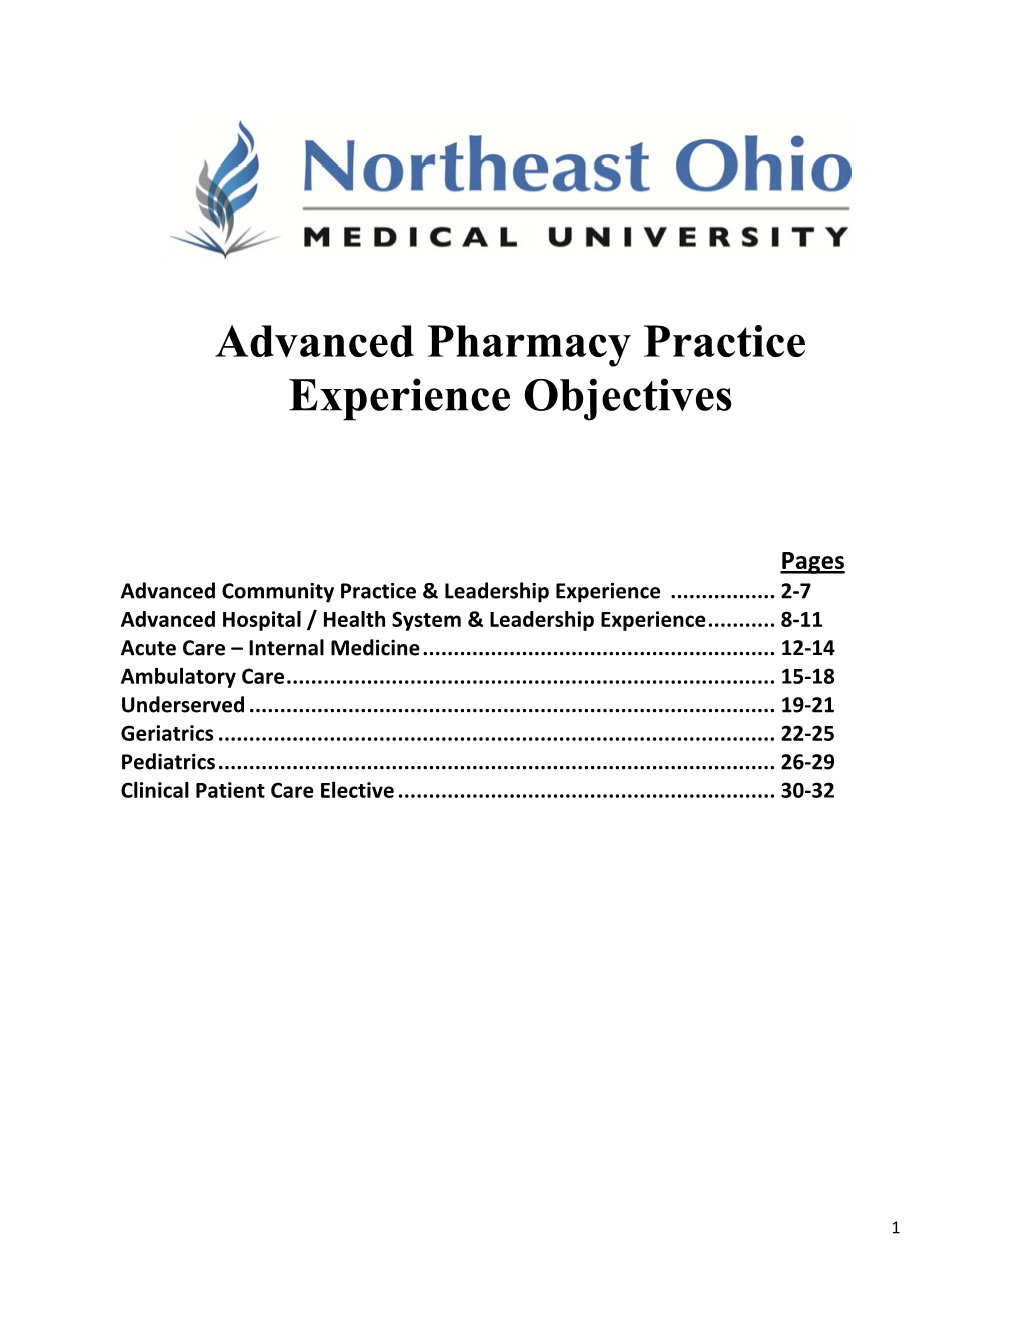 Advanced Pharmacy Practice Experience Objectives